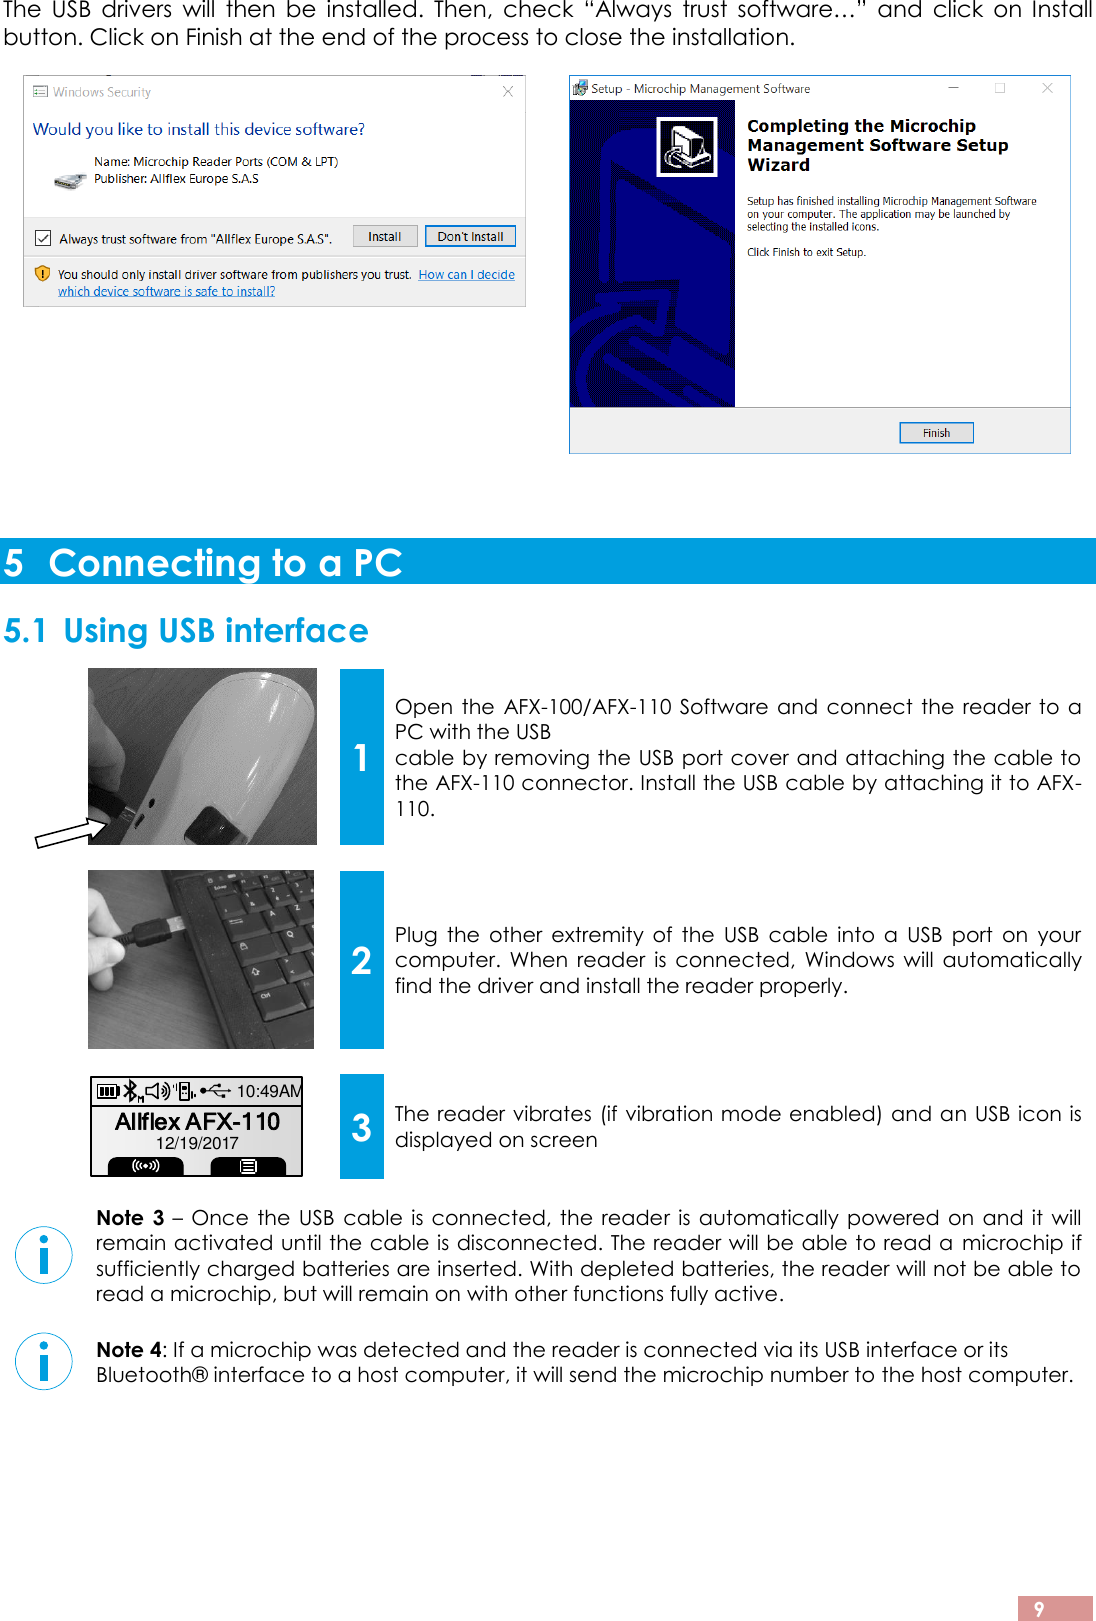  9 The  USB  drivers  will  then  be  installed.  Then,  check  “Always  trust  software…”  and  click  on  Install button. Click on Finish at the end of the process to close the installation.   5 Connecting to a PC 5.1 Using USB interface  1 Open the AFX-100/AFX-110 Software and connect the reader to a PC with the USB cable by removing the USB port cover and attaching the cable to the AFX-110 connector. Install the USB cable by attaching it to AFX-110.     2 Plug  the  other  extremity  of  the  USB  cable  into  a  USB  port  on  your computer.  When  reader  is  connected,  Windows  will  automatically find the driver and install the reader properly.     3 The reader vibrates (if vibration mode enabled) and an USB icon is displayed on screen   Note  3 – Once the USB cable is connected, the reader is automatically powered on and it will remain activated until the cable is disconnected. The reader will be able to read a  microchip if sufficiently charged batteries are inserted. With depleted batteries, the reader will not be able to read a microchip, but will remain on with other functions fully active.    Note 4: If a microchip was detected and the reader is connected via its USB interface or its Bluetooth® interface to a host computer, it will send the microchip number to the host computer.     Allflex AFX-11010:49AM12/19/2017